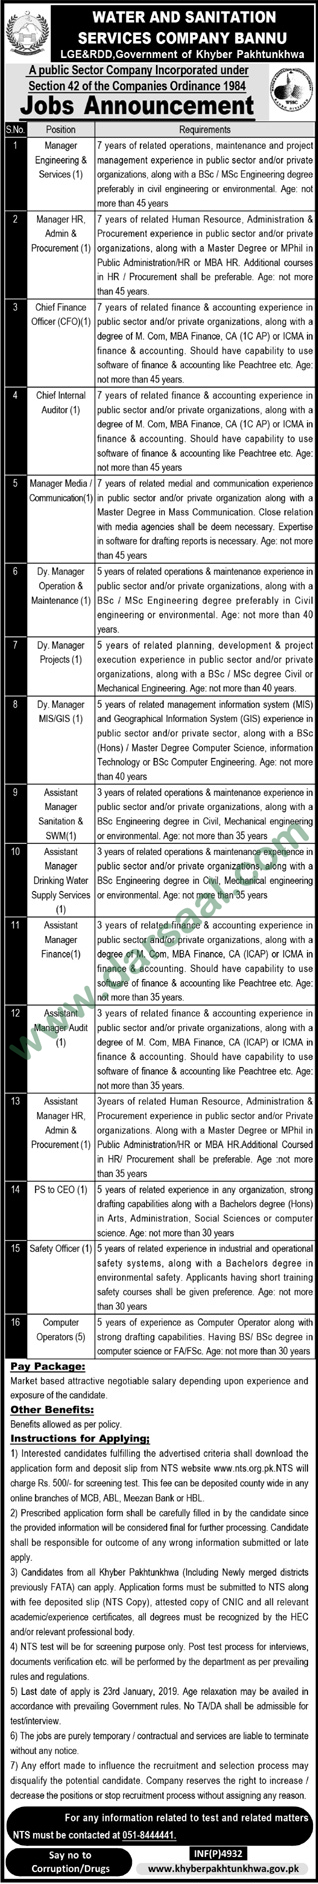 Admin Jobs in Water & Sanitation Services Company Bannu in Bannu - Dec 27, 2018